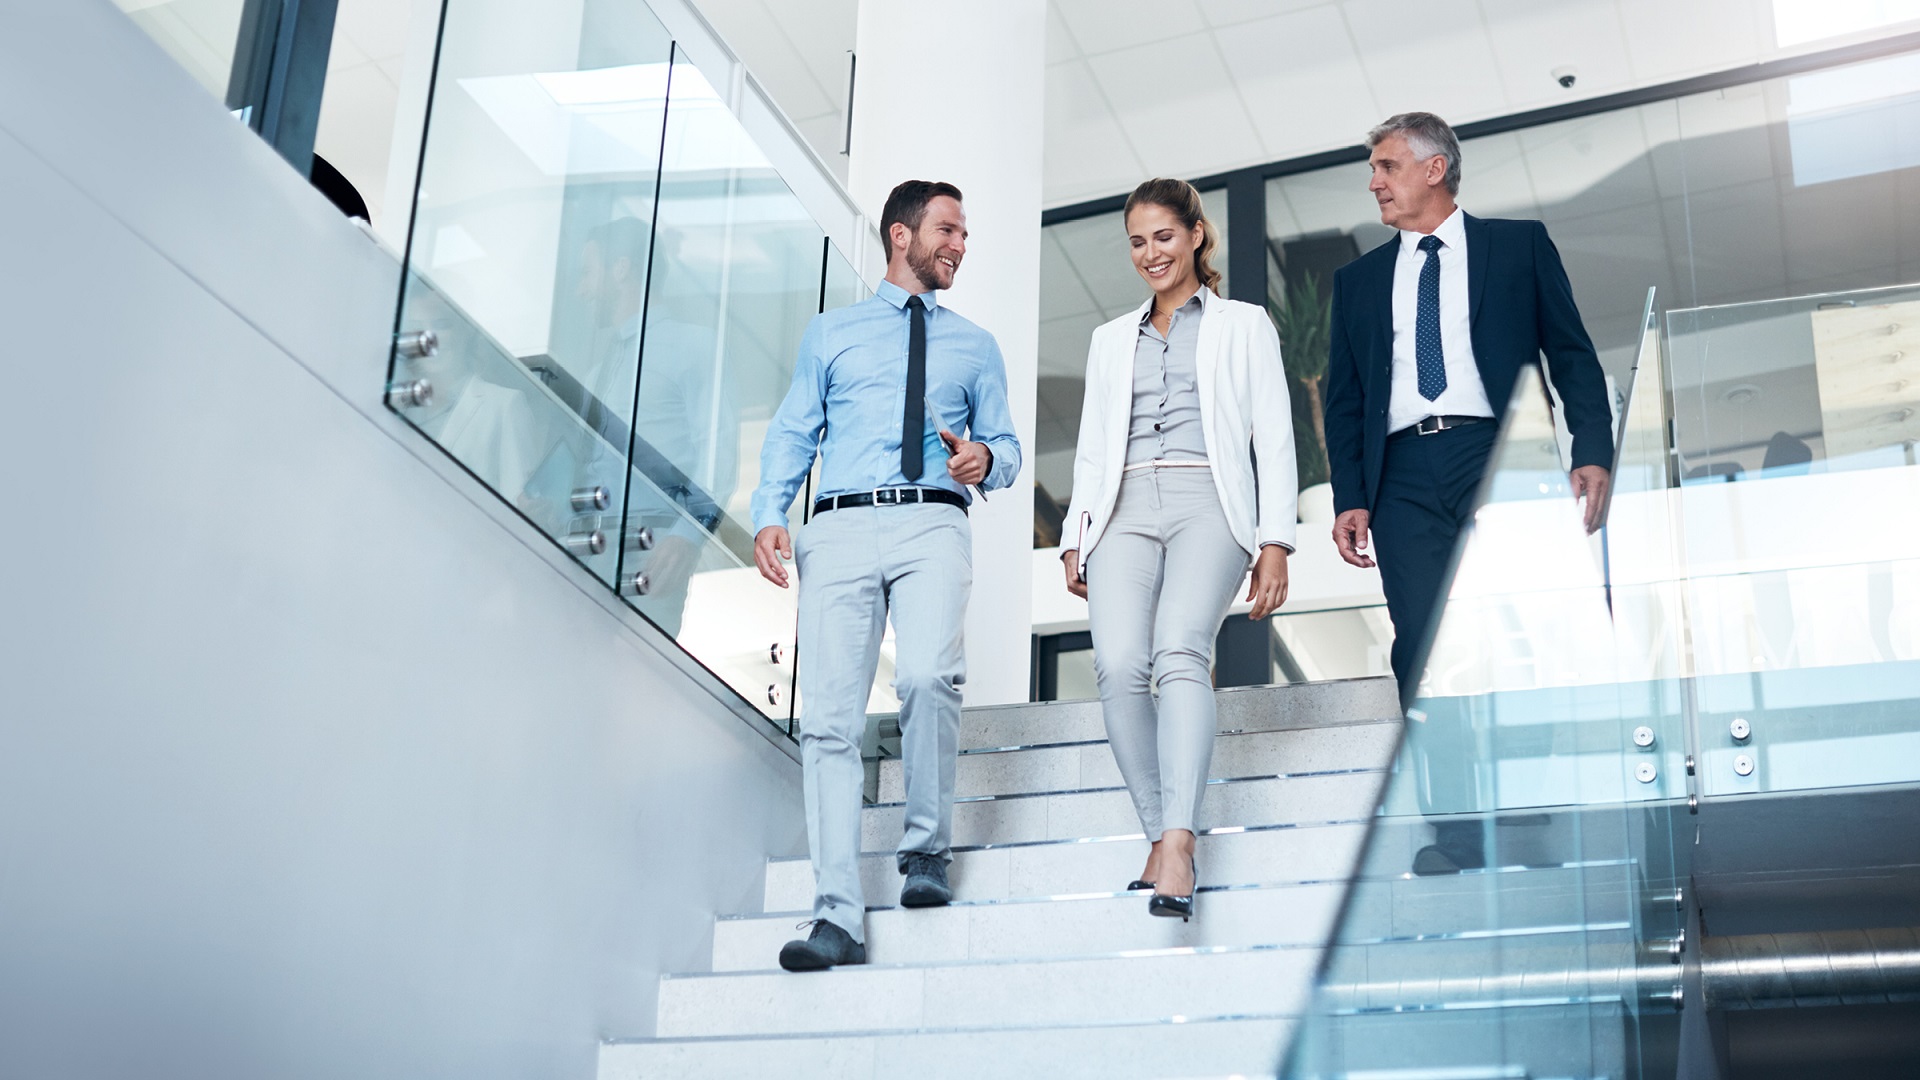 Three businesspeople walking down stairs in a glass building